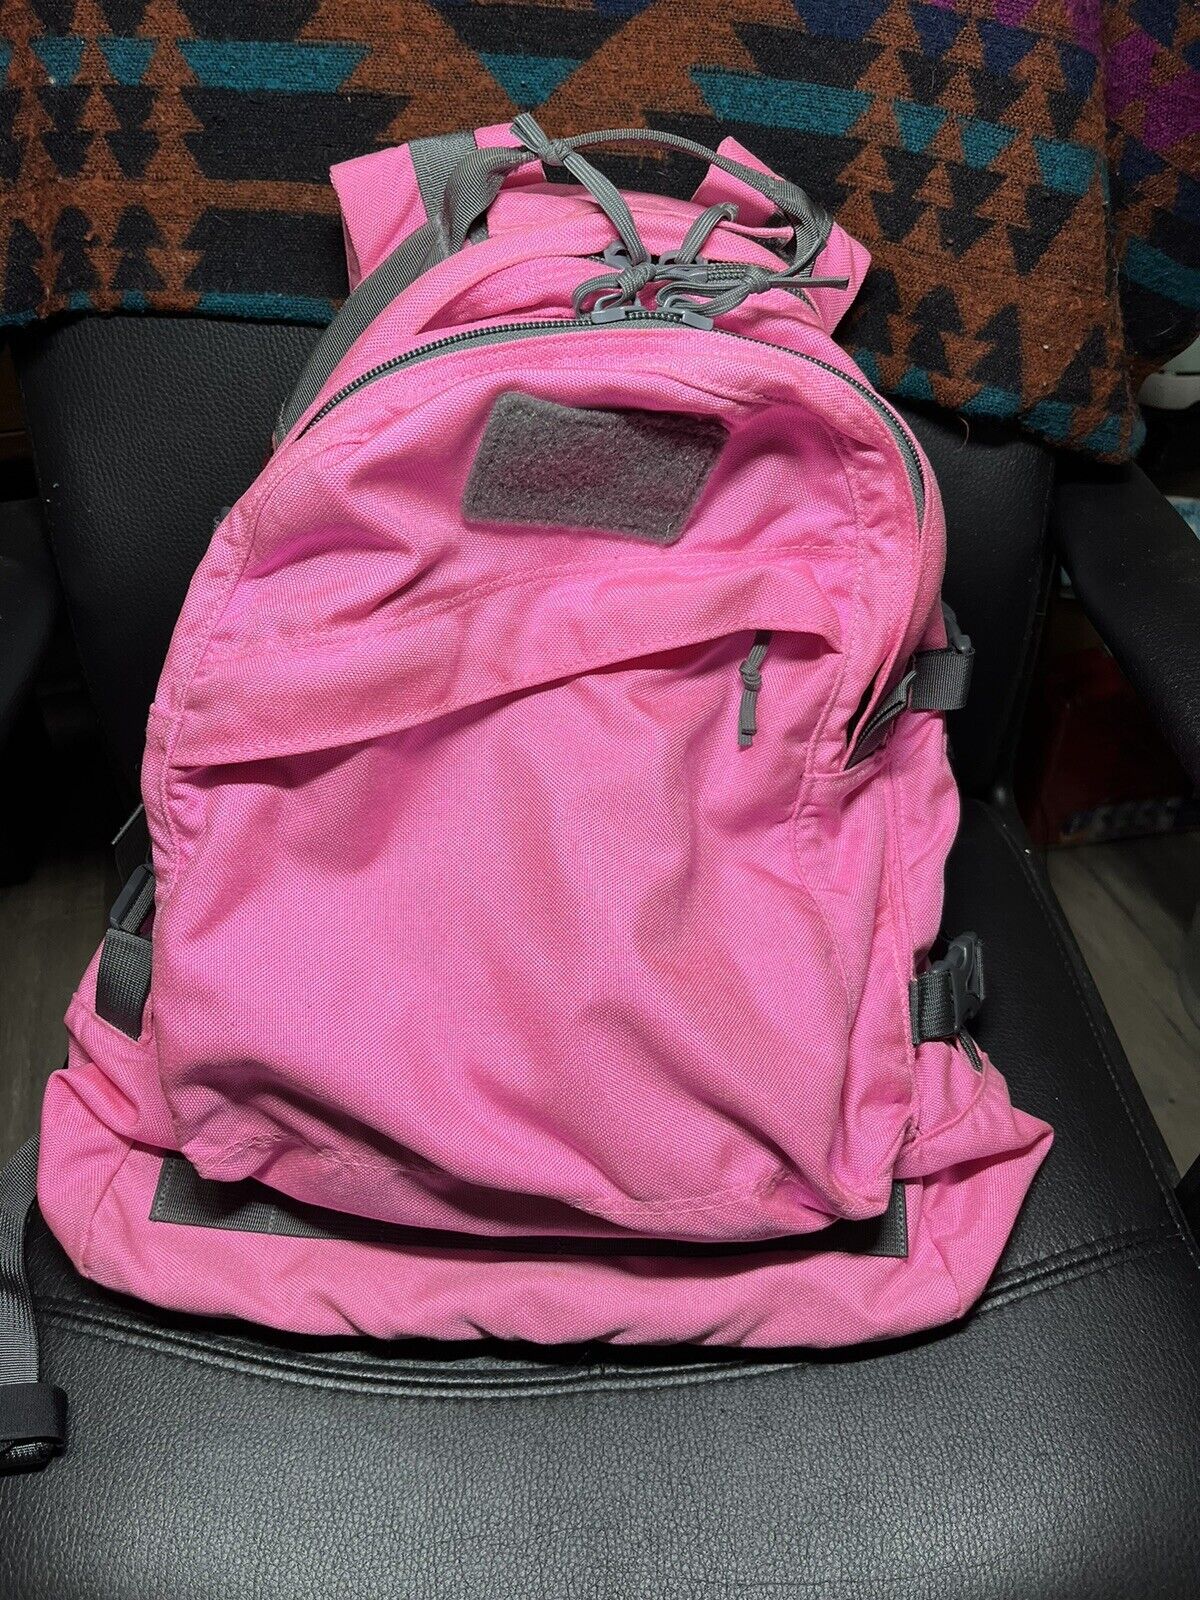 London Bridge Trading LBT-1476A-NM Standard 3 Day Assault Pack PINK Used Ruck